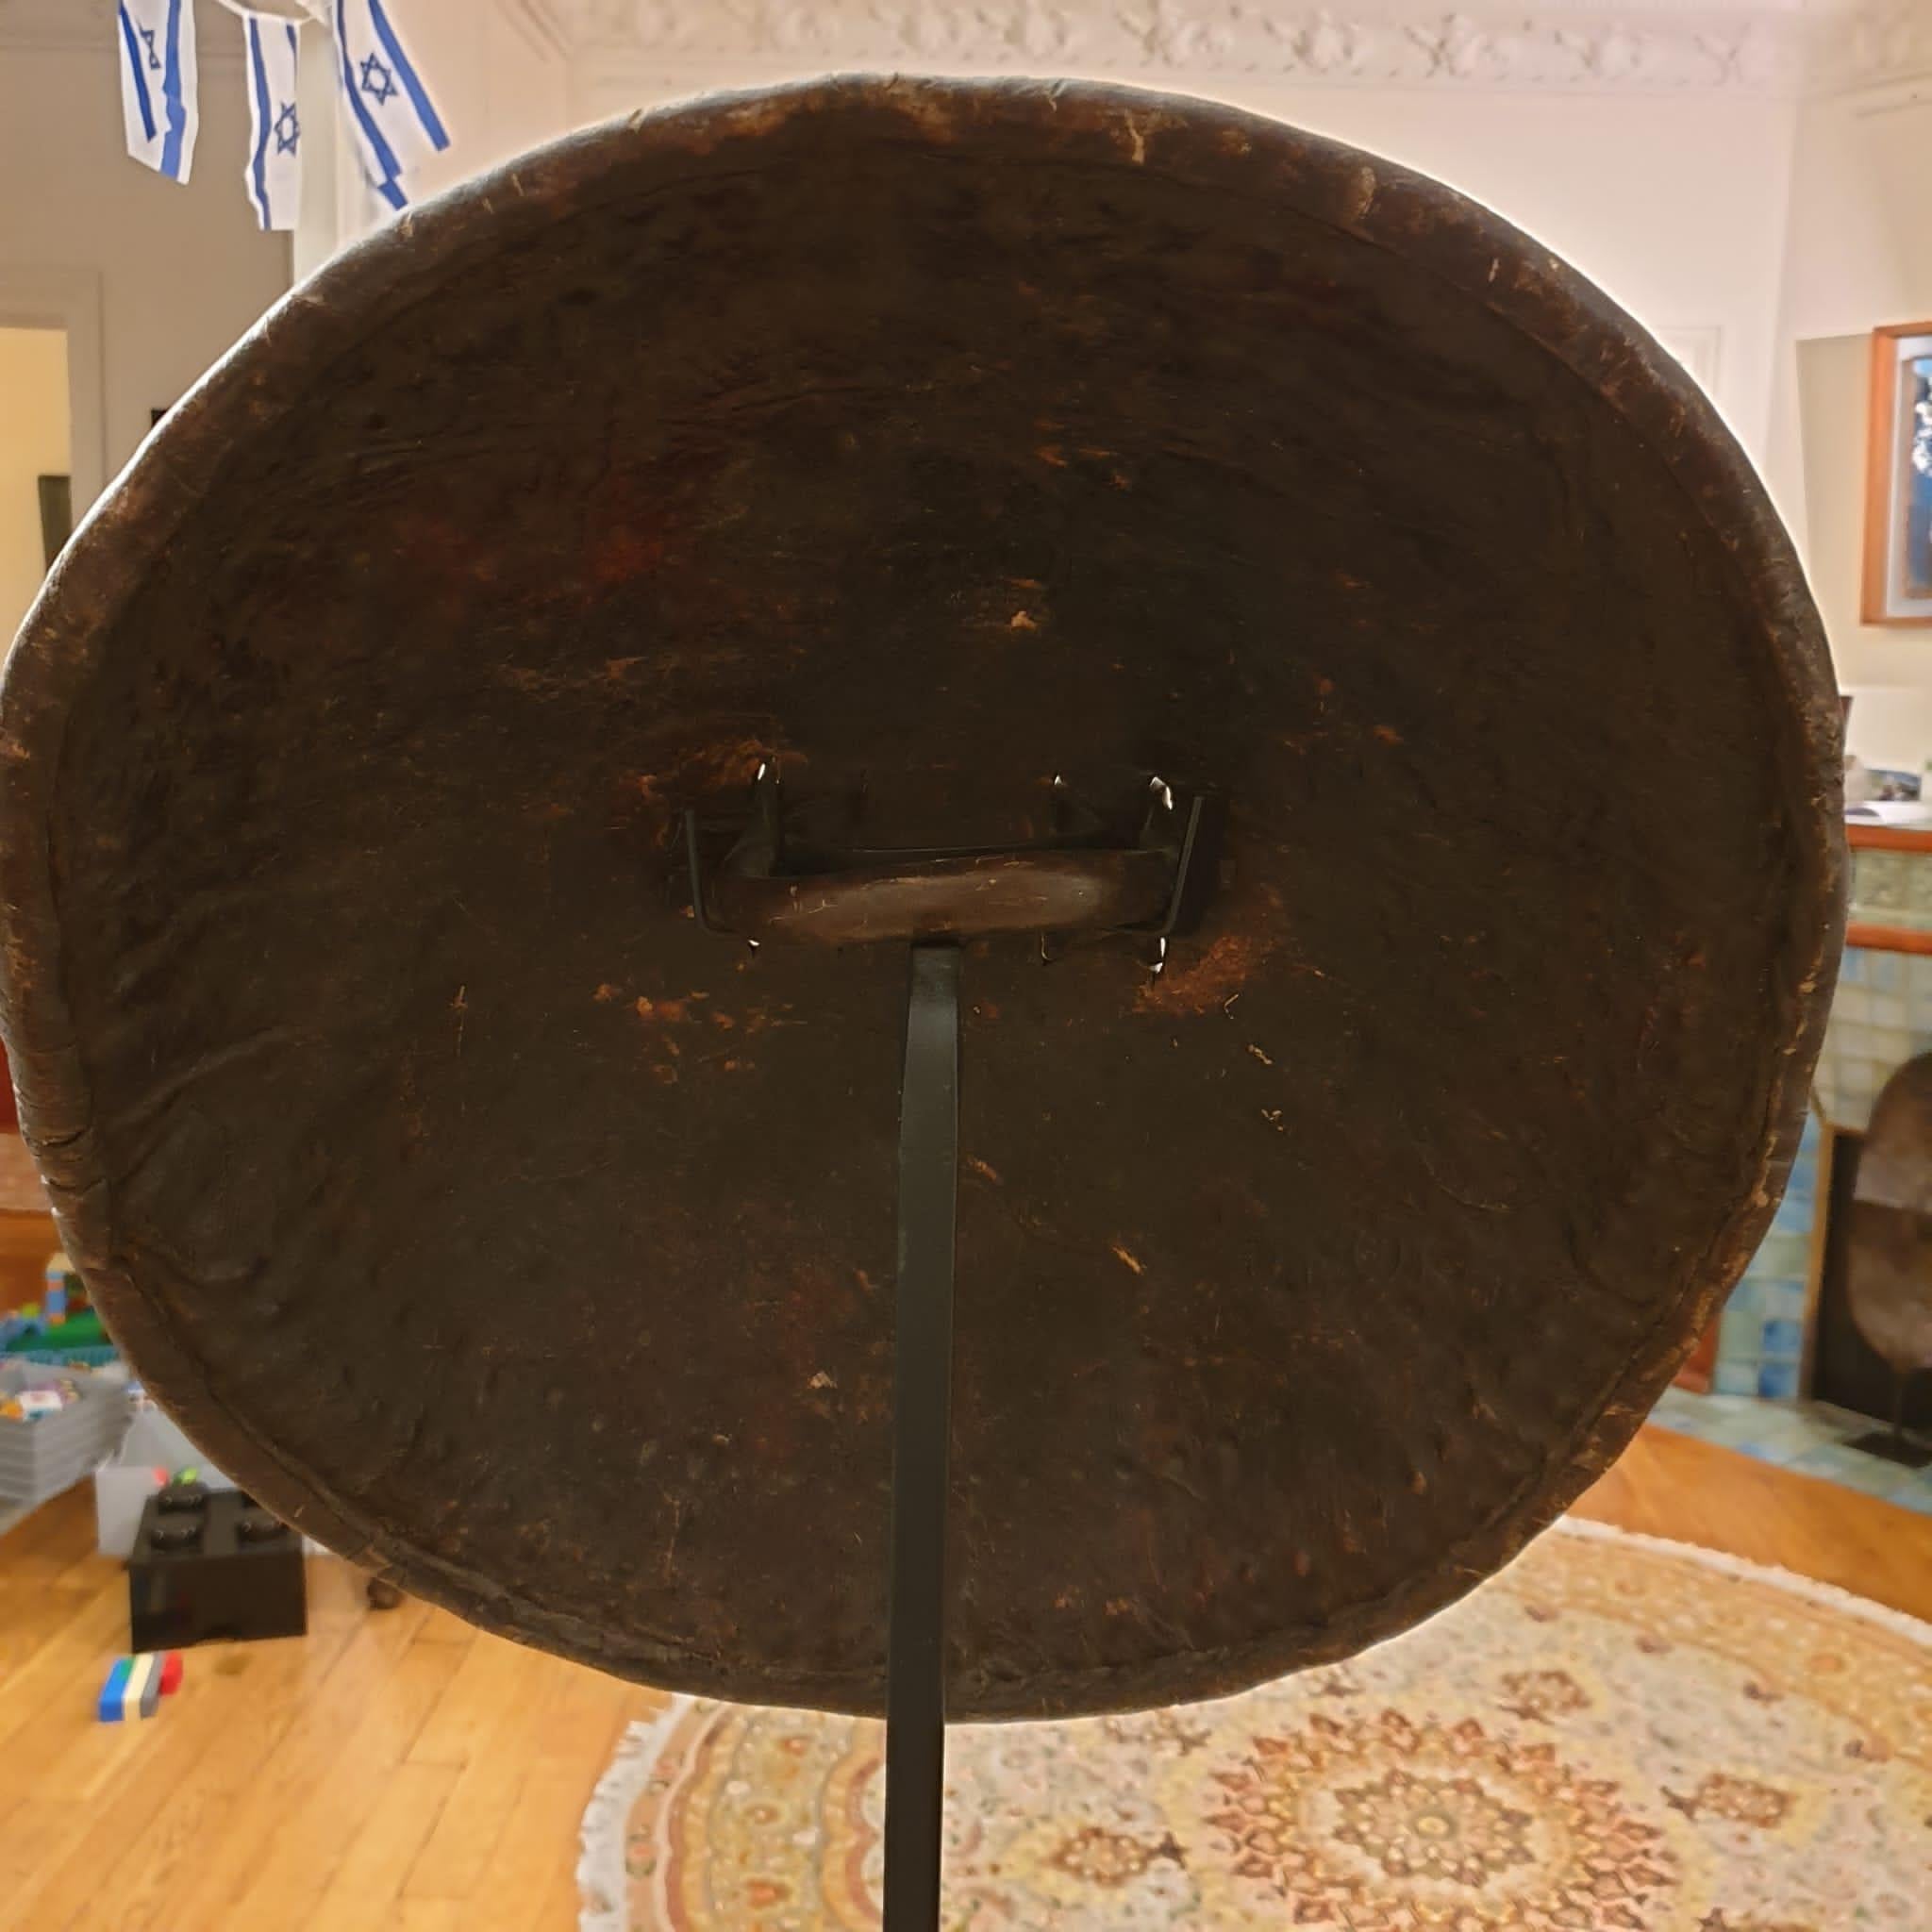 The Amhara Shield is an artful creation crafted around 1910 in the Lake Tana region of northern Ethiopia. Made from buffalo or hippopotamus leather, it features a sturdy steel base. With a diameter of 70 cm, it stands as an impressive and culturally